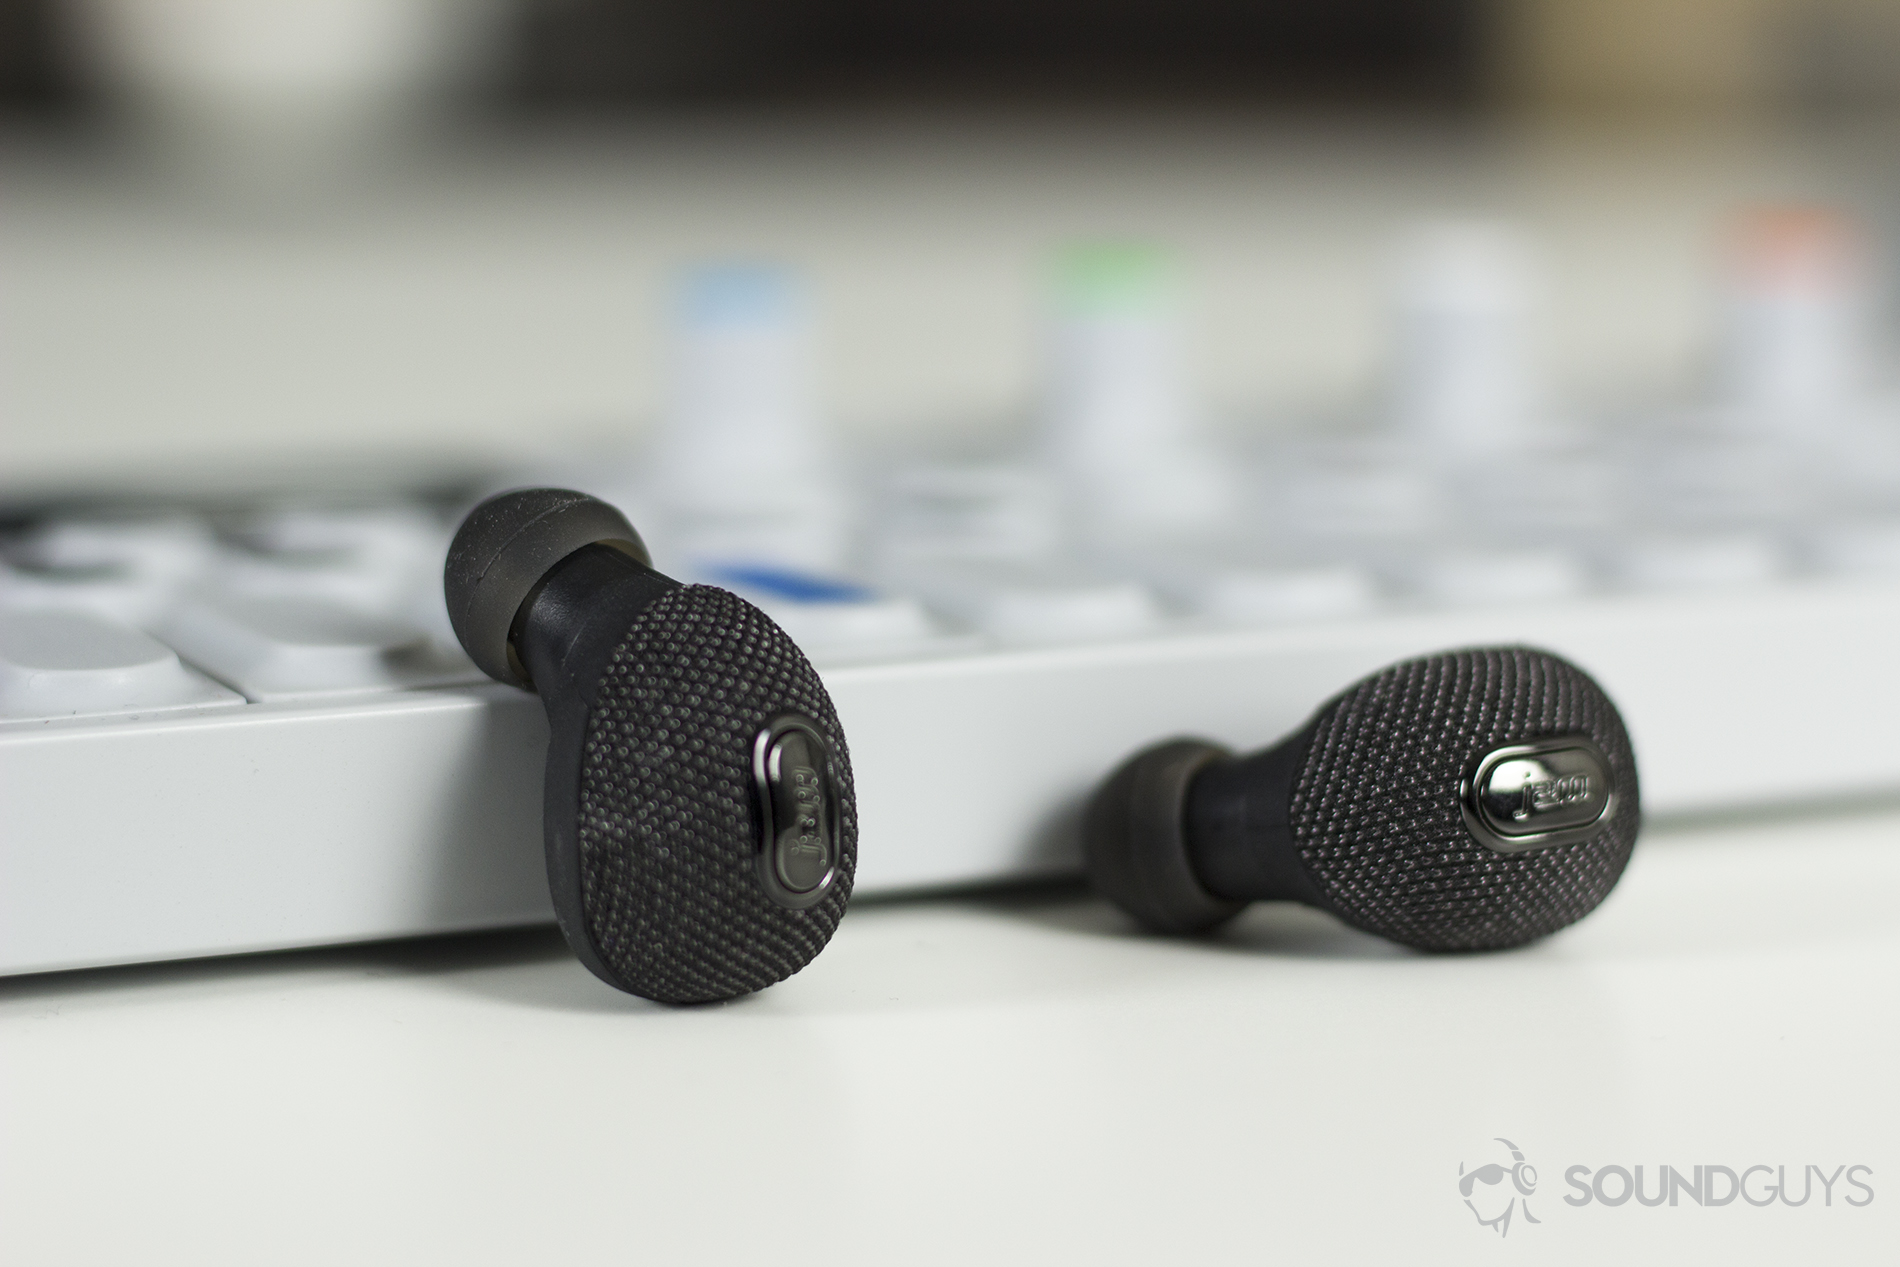 The Jam Ultra true wireless earbuds can be had for $75, making these the best bang for your buck. Pictured: The earbuds leaned against a mini mixer.